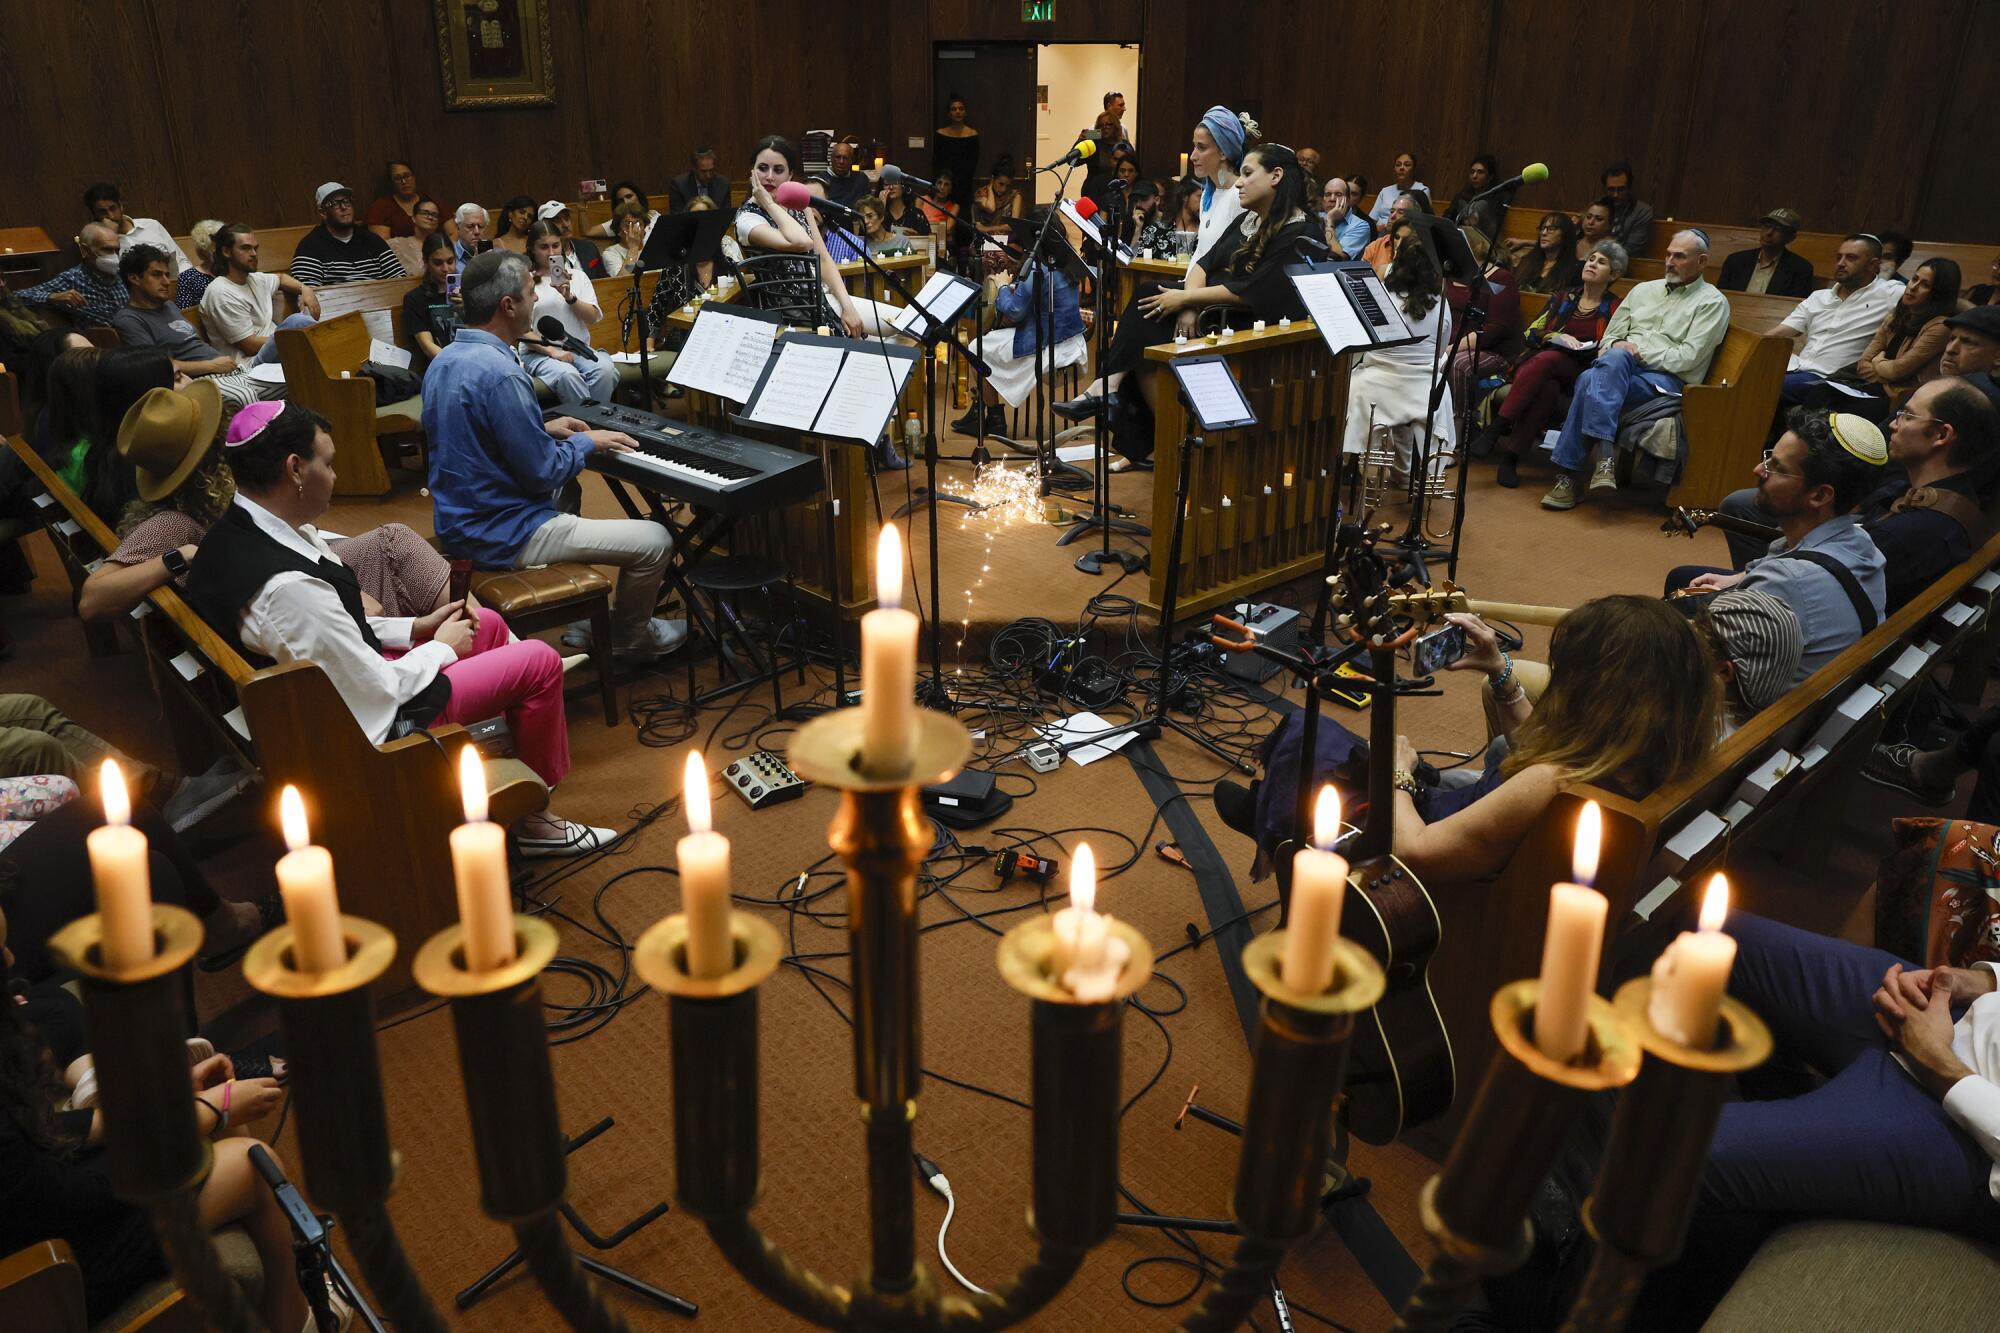 Sinai Temple hosts a concert in support of Israel.